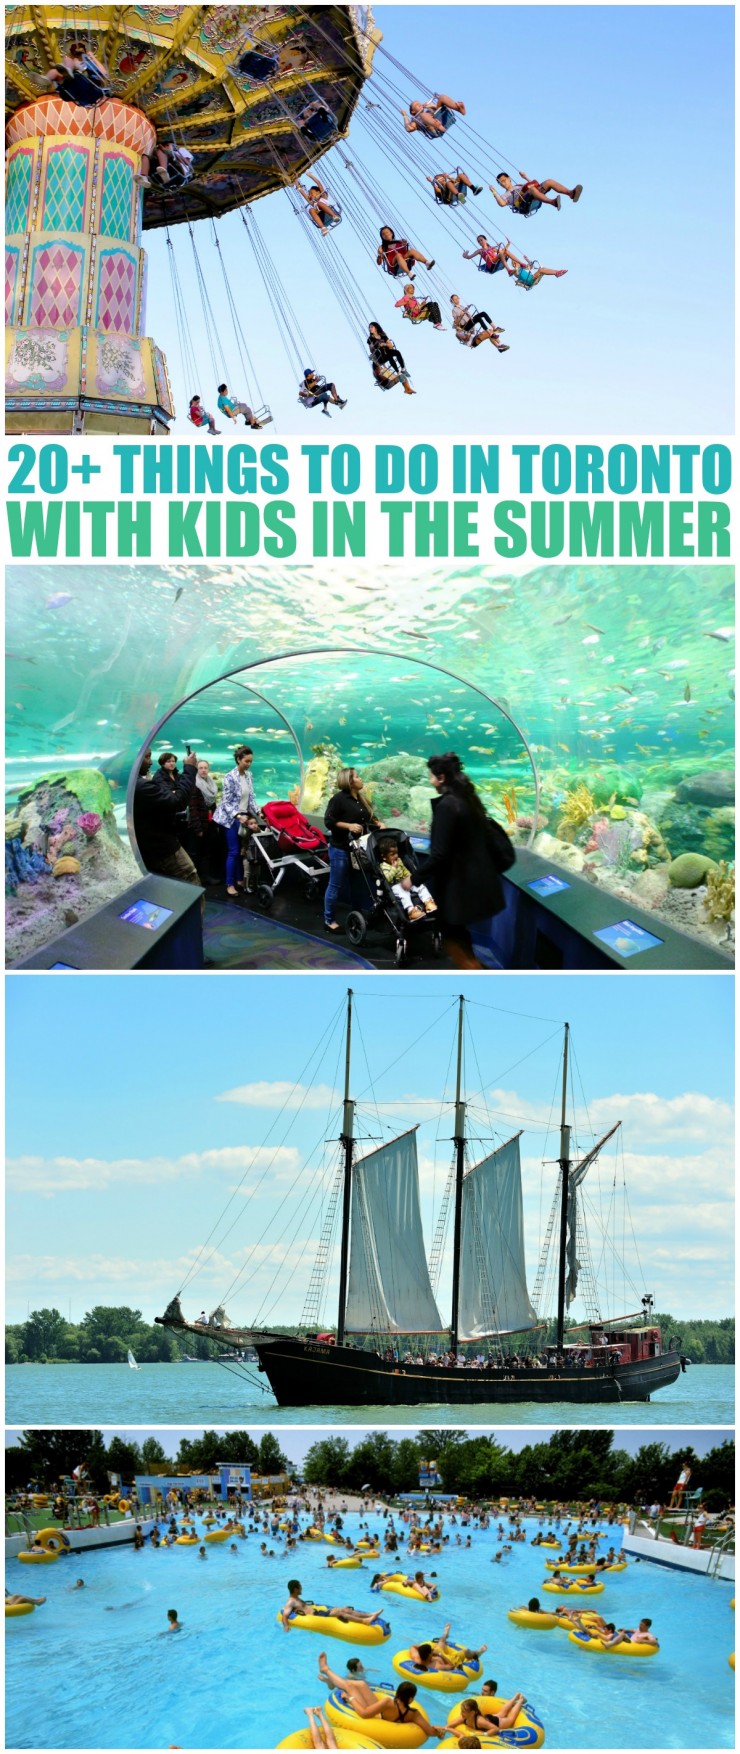 20+ Things to do in Toronto with Kids in the Summer. Great destinations for family travel whether you live in the 6 or visiting as a tourist.